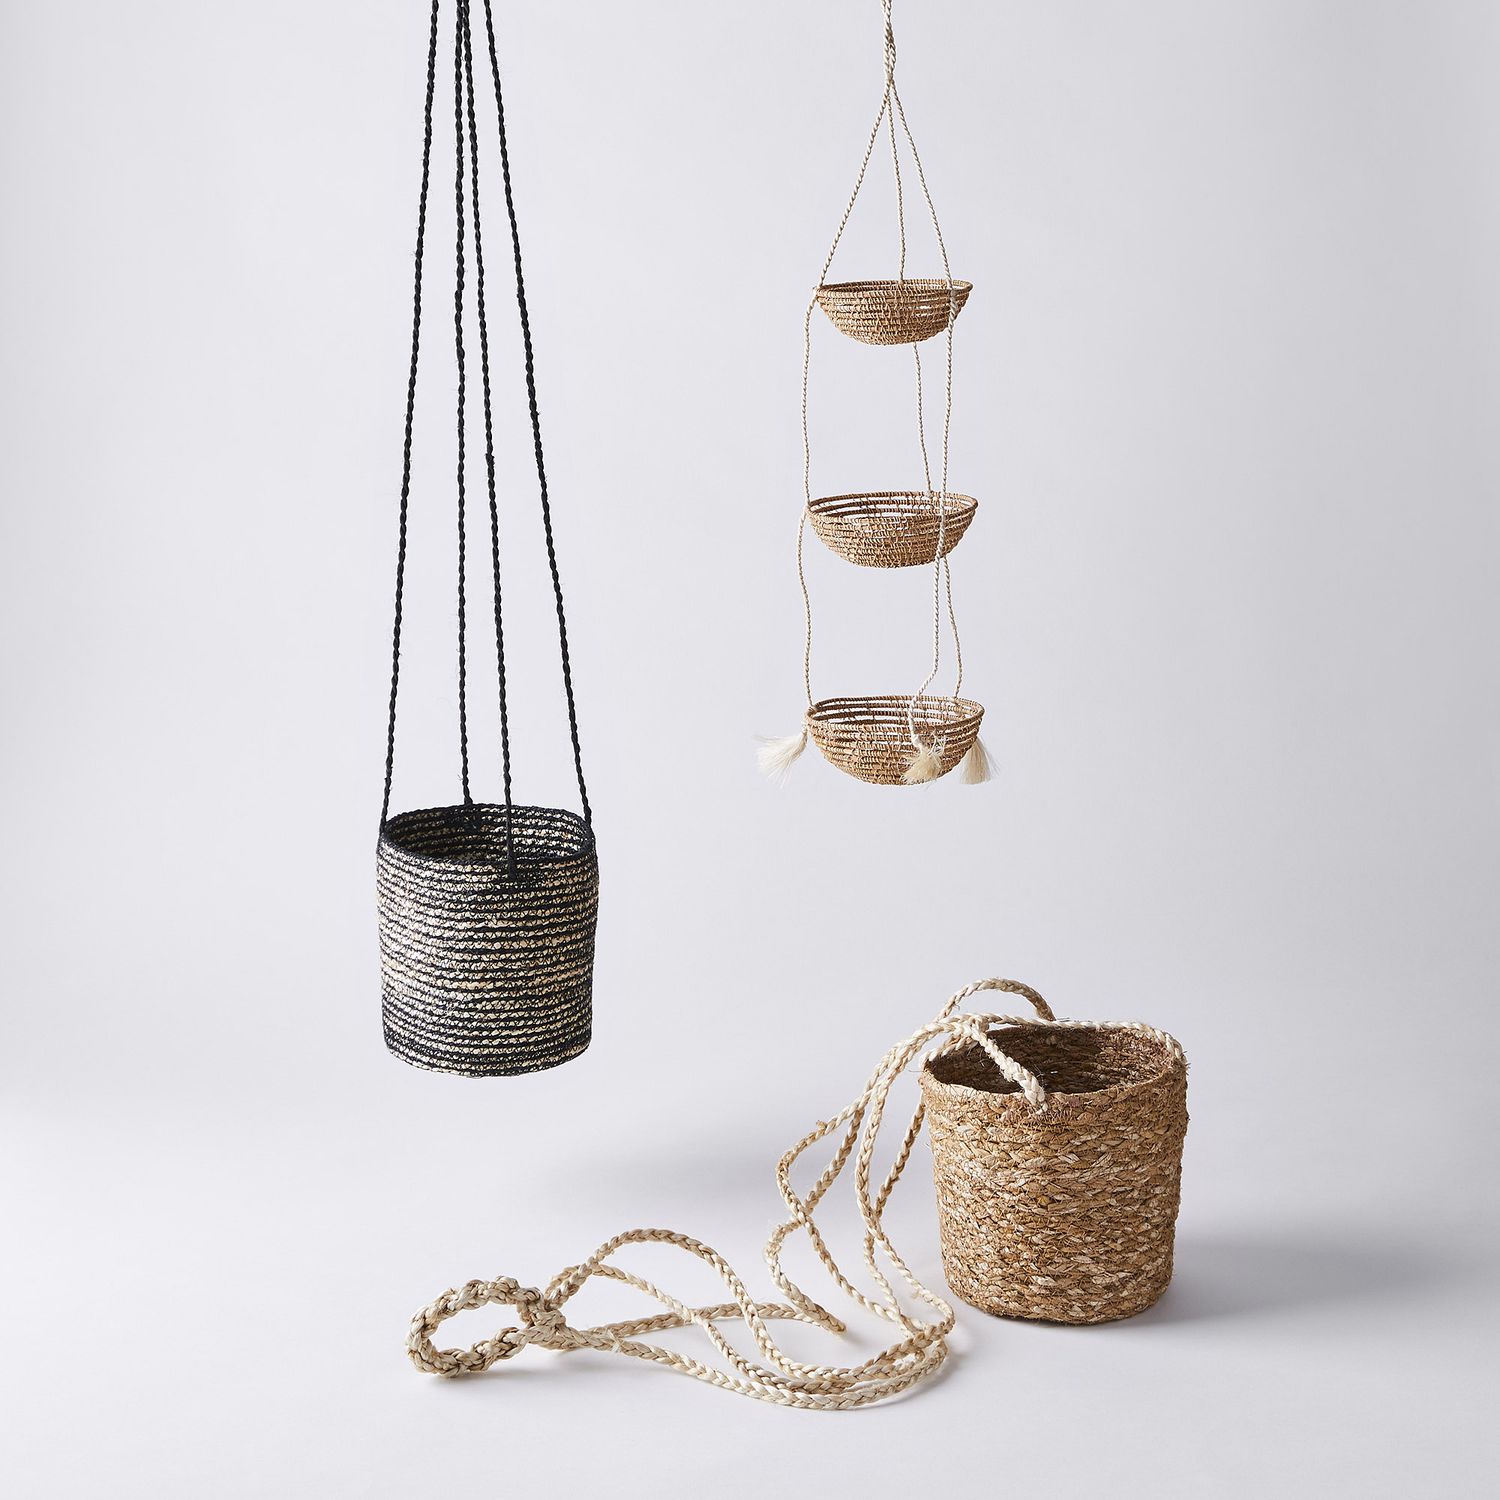 Handwoven Hanging Baskets and Planters